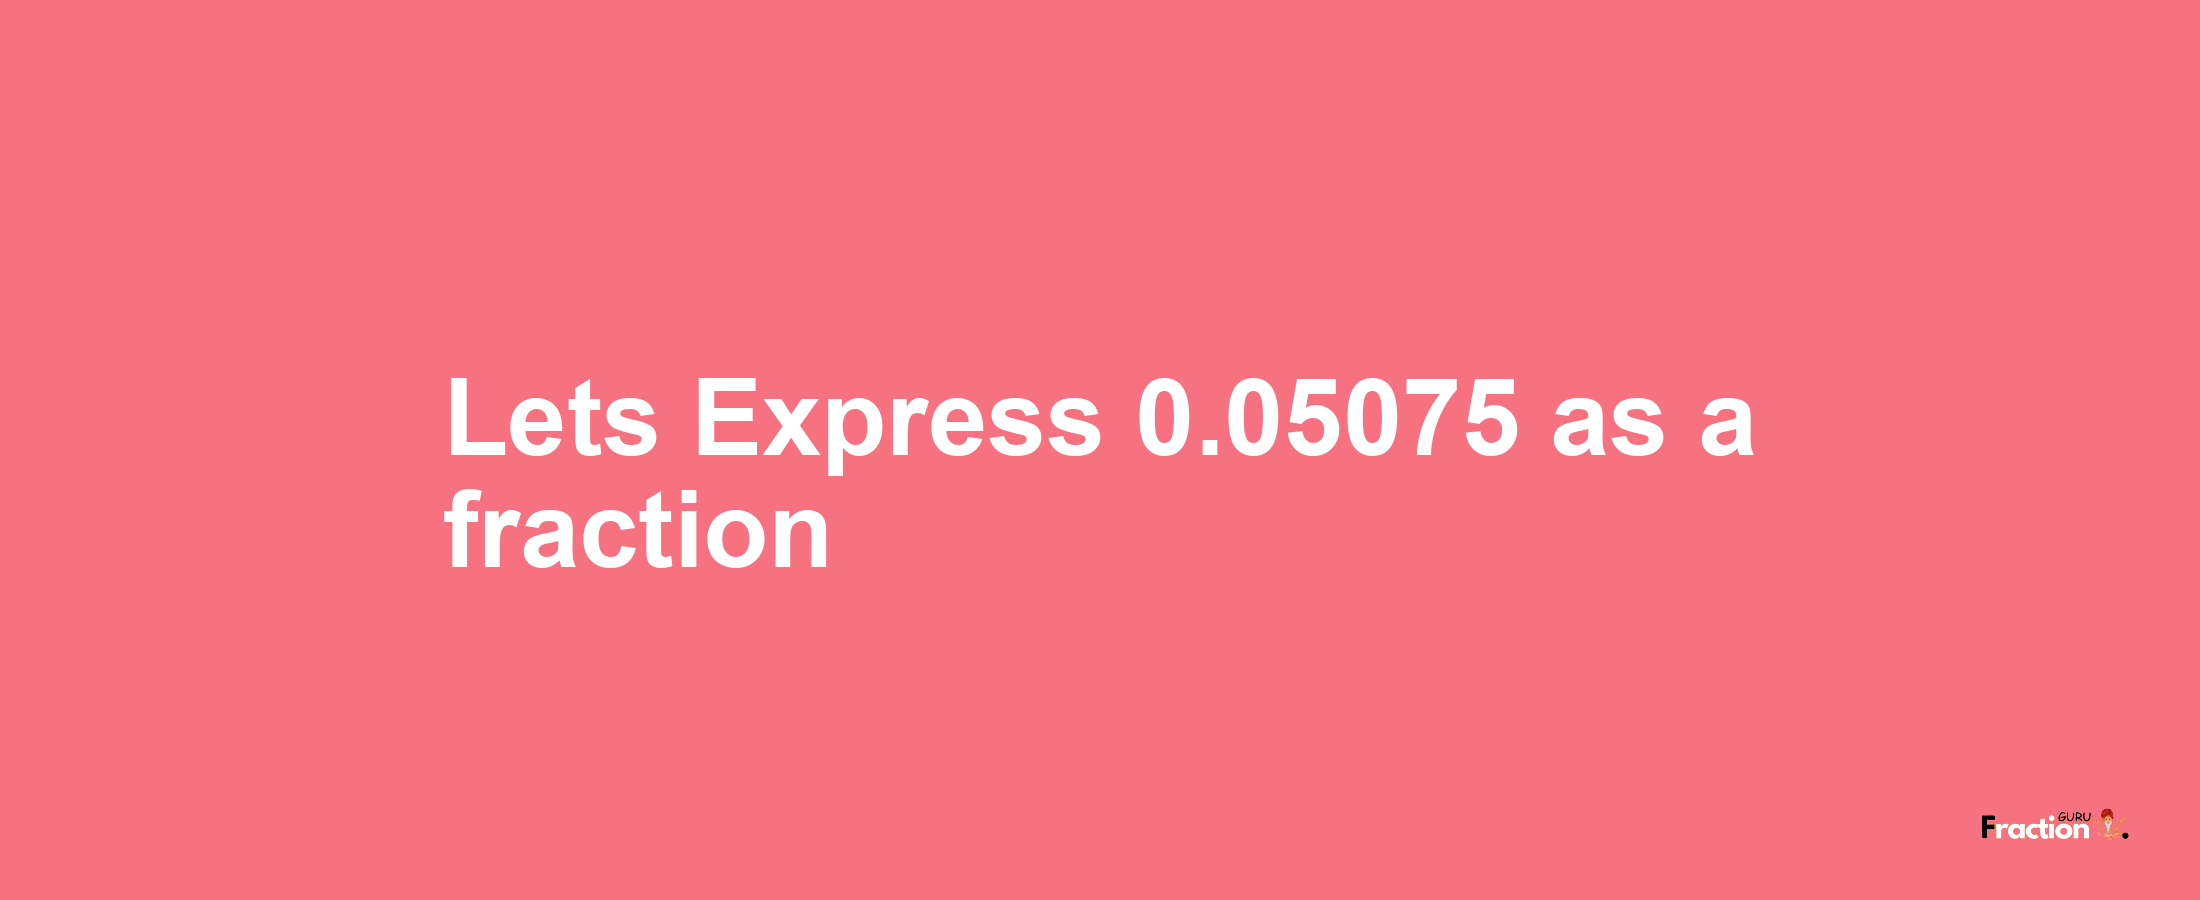 Lets Express 0.05075 as afraction